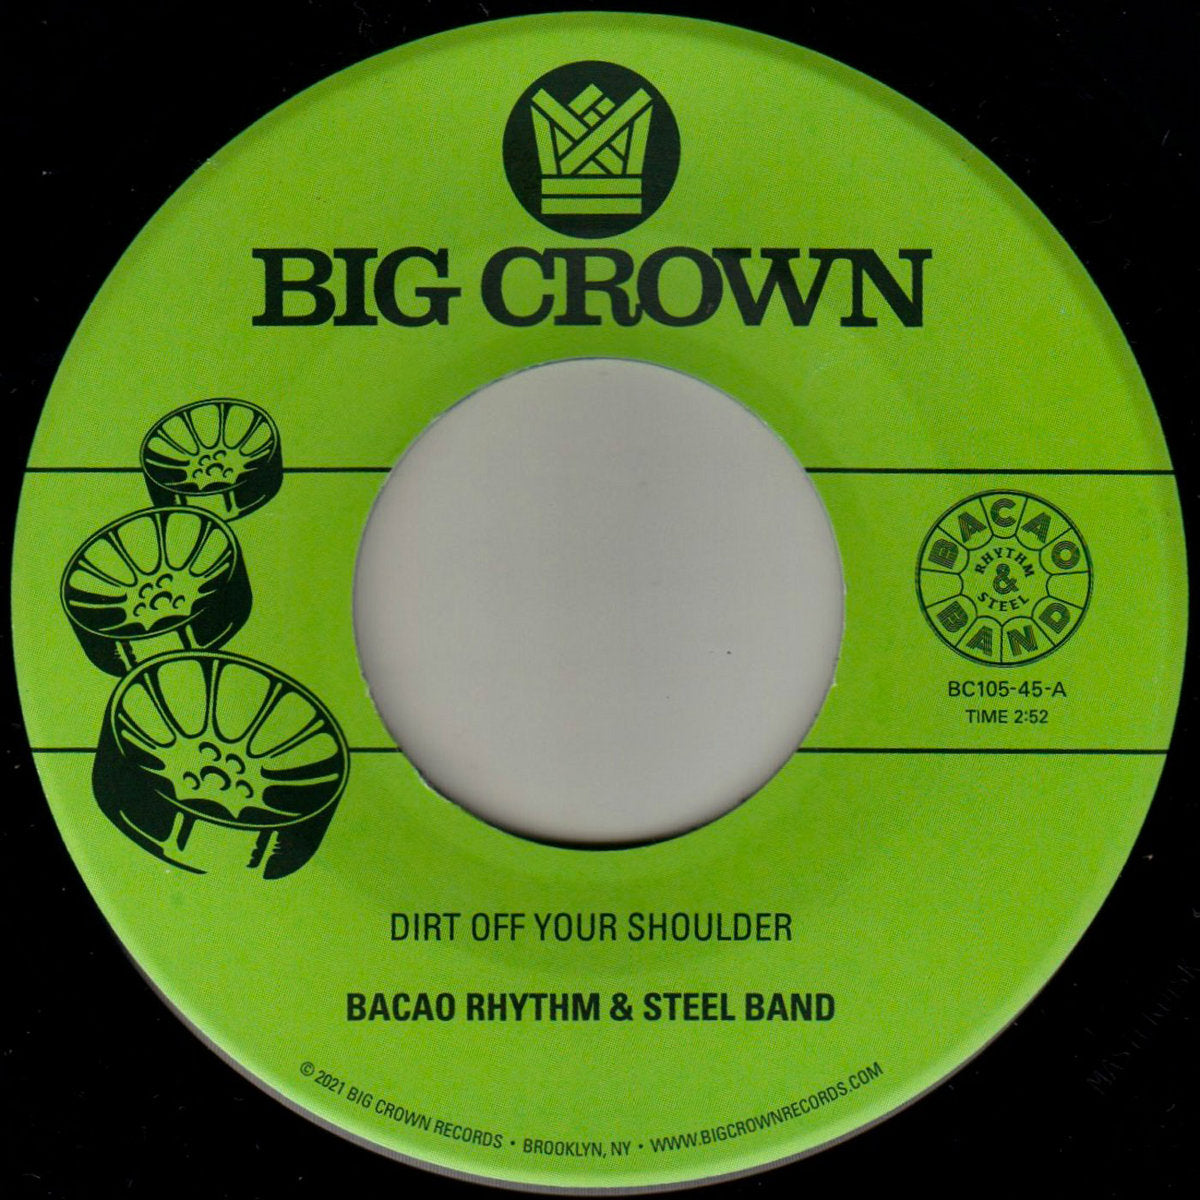 Dirt Off Your Shoulder b/w I Need Somebody To Love (New 7")